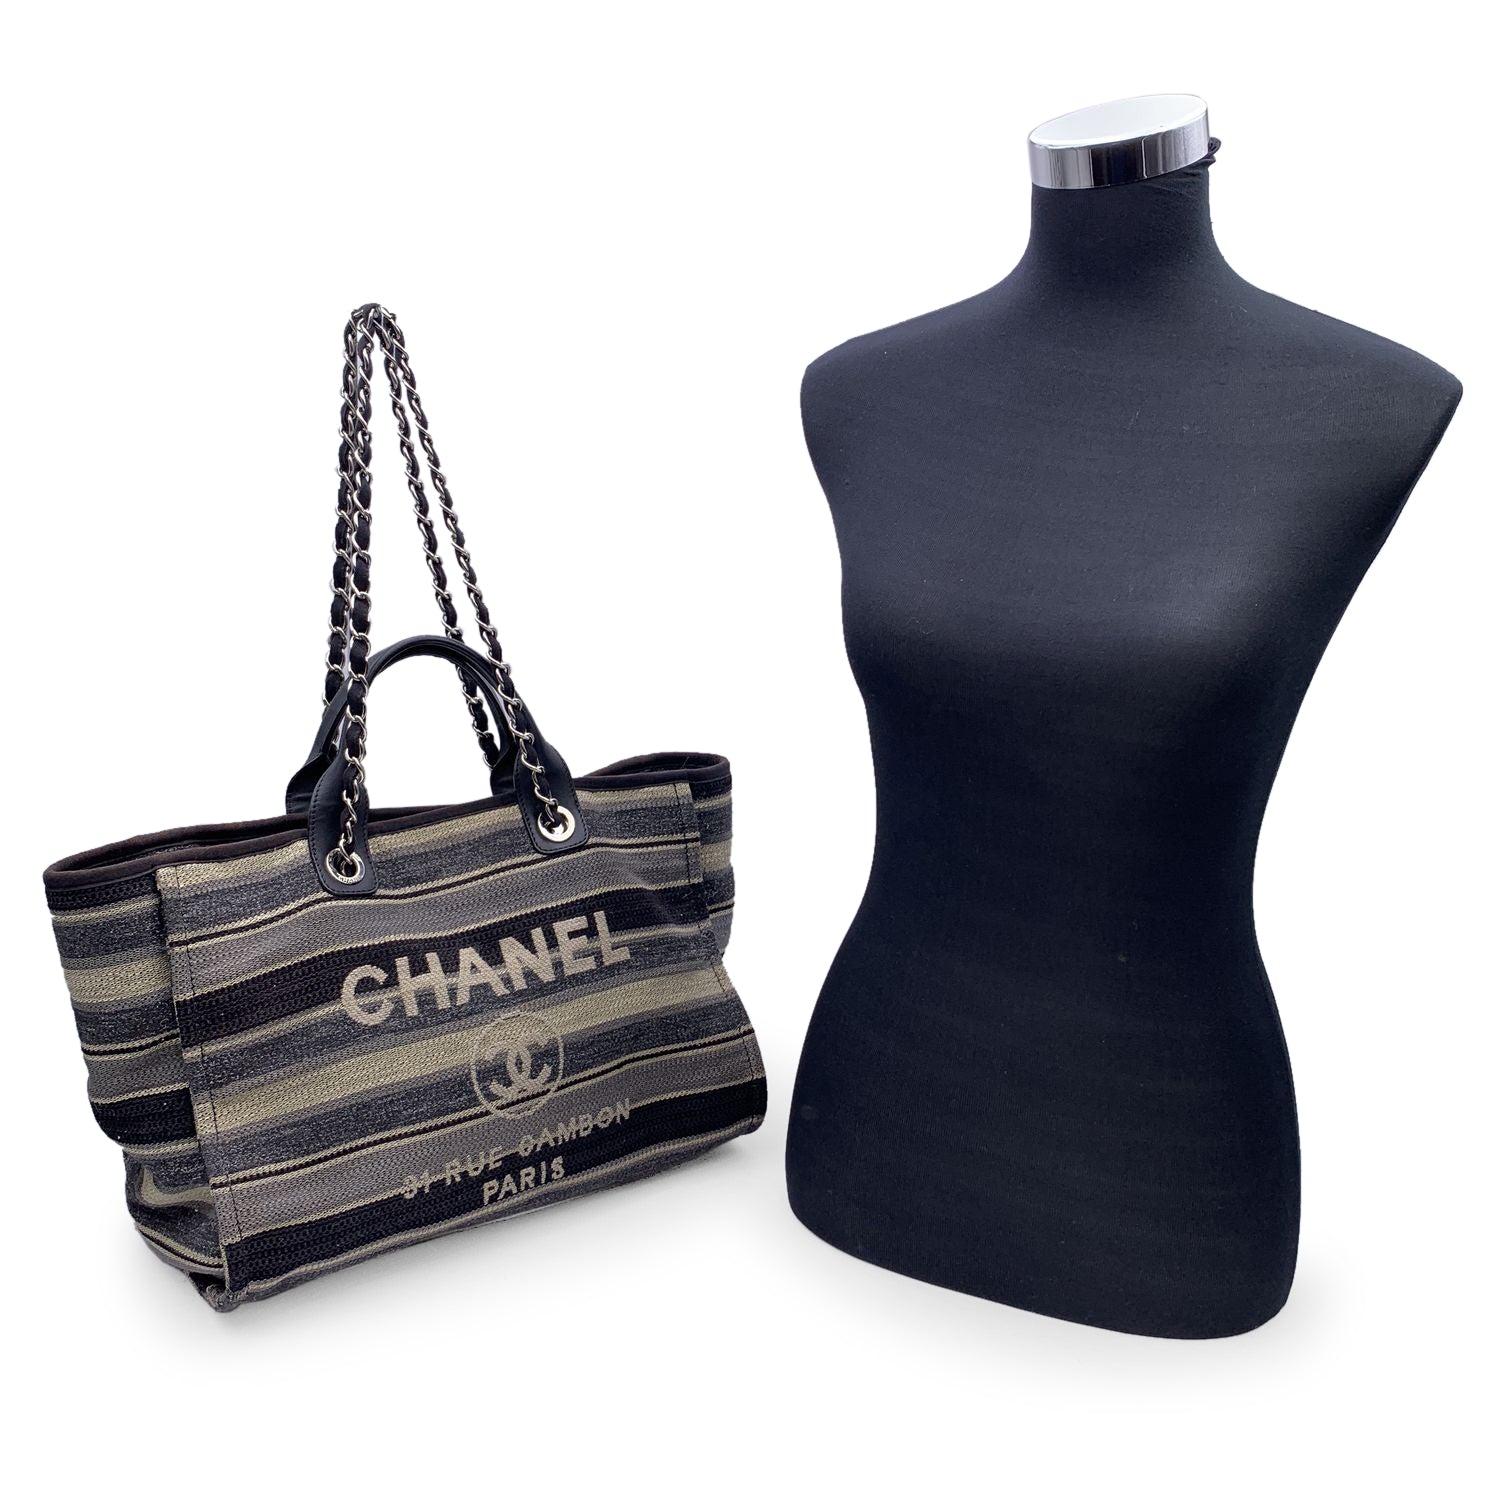 Beautiful Chanel 'Deauville' tote, crafted in black, grey and beige striped canvas with a white 'Chanel CC31, Rue cambon - Paris' logo. Period/Era: 2018/2019. Double black eather top handles and silver metal and interwoven leather shoulder straps.